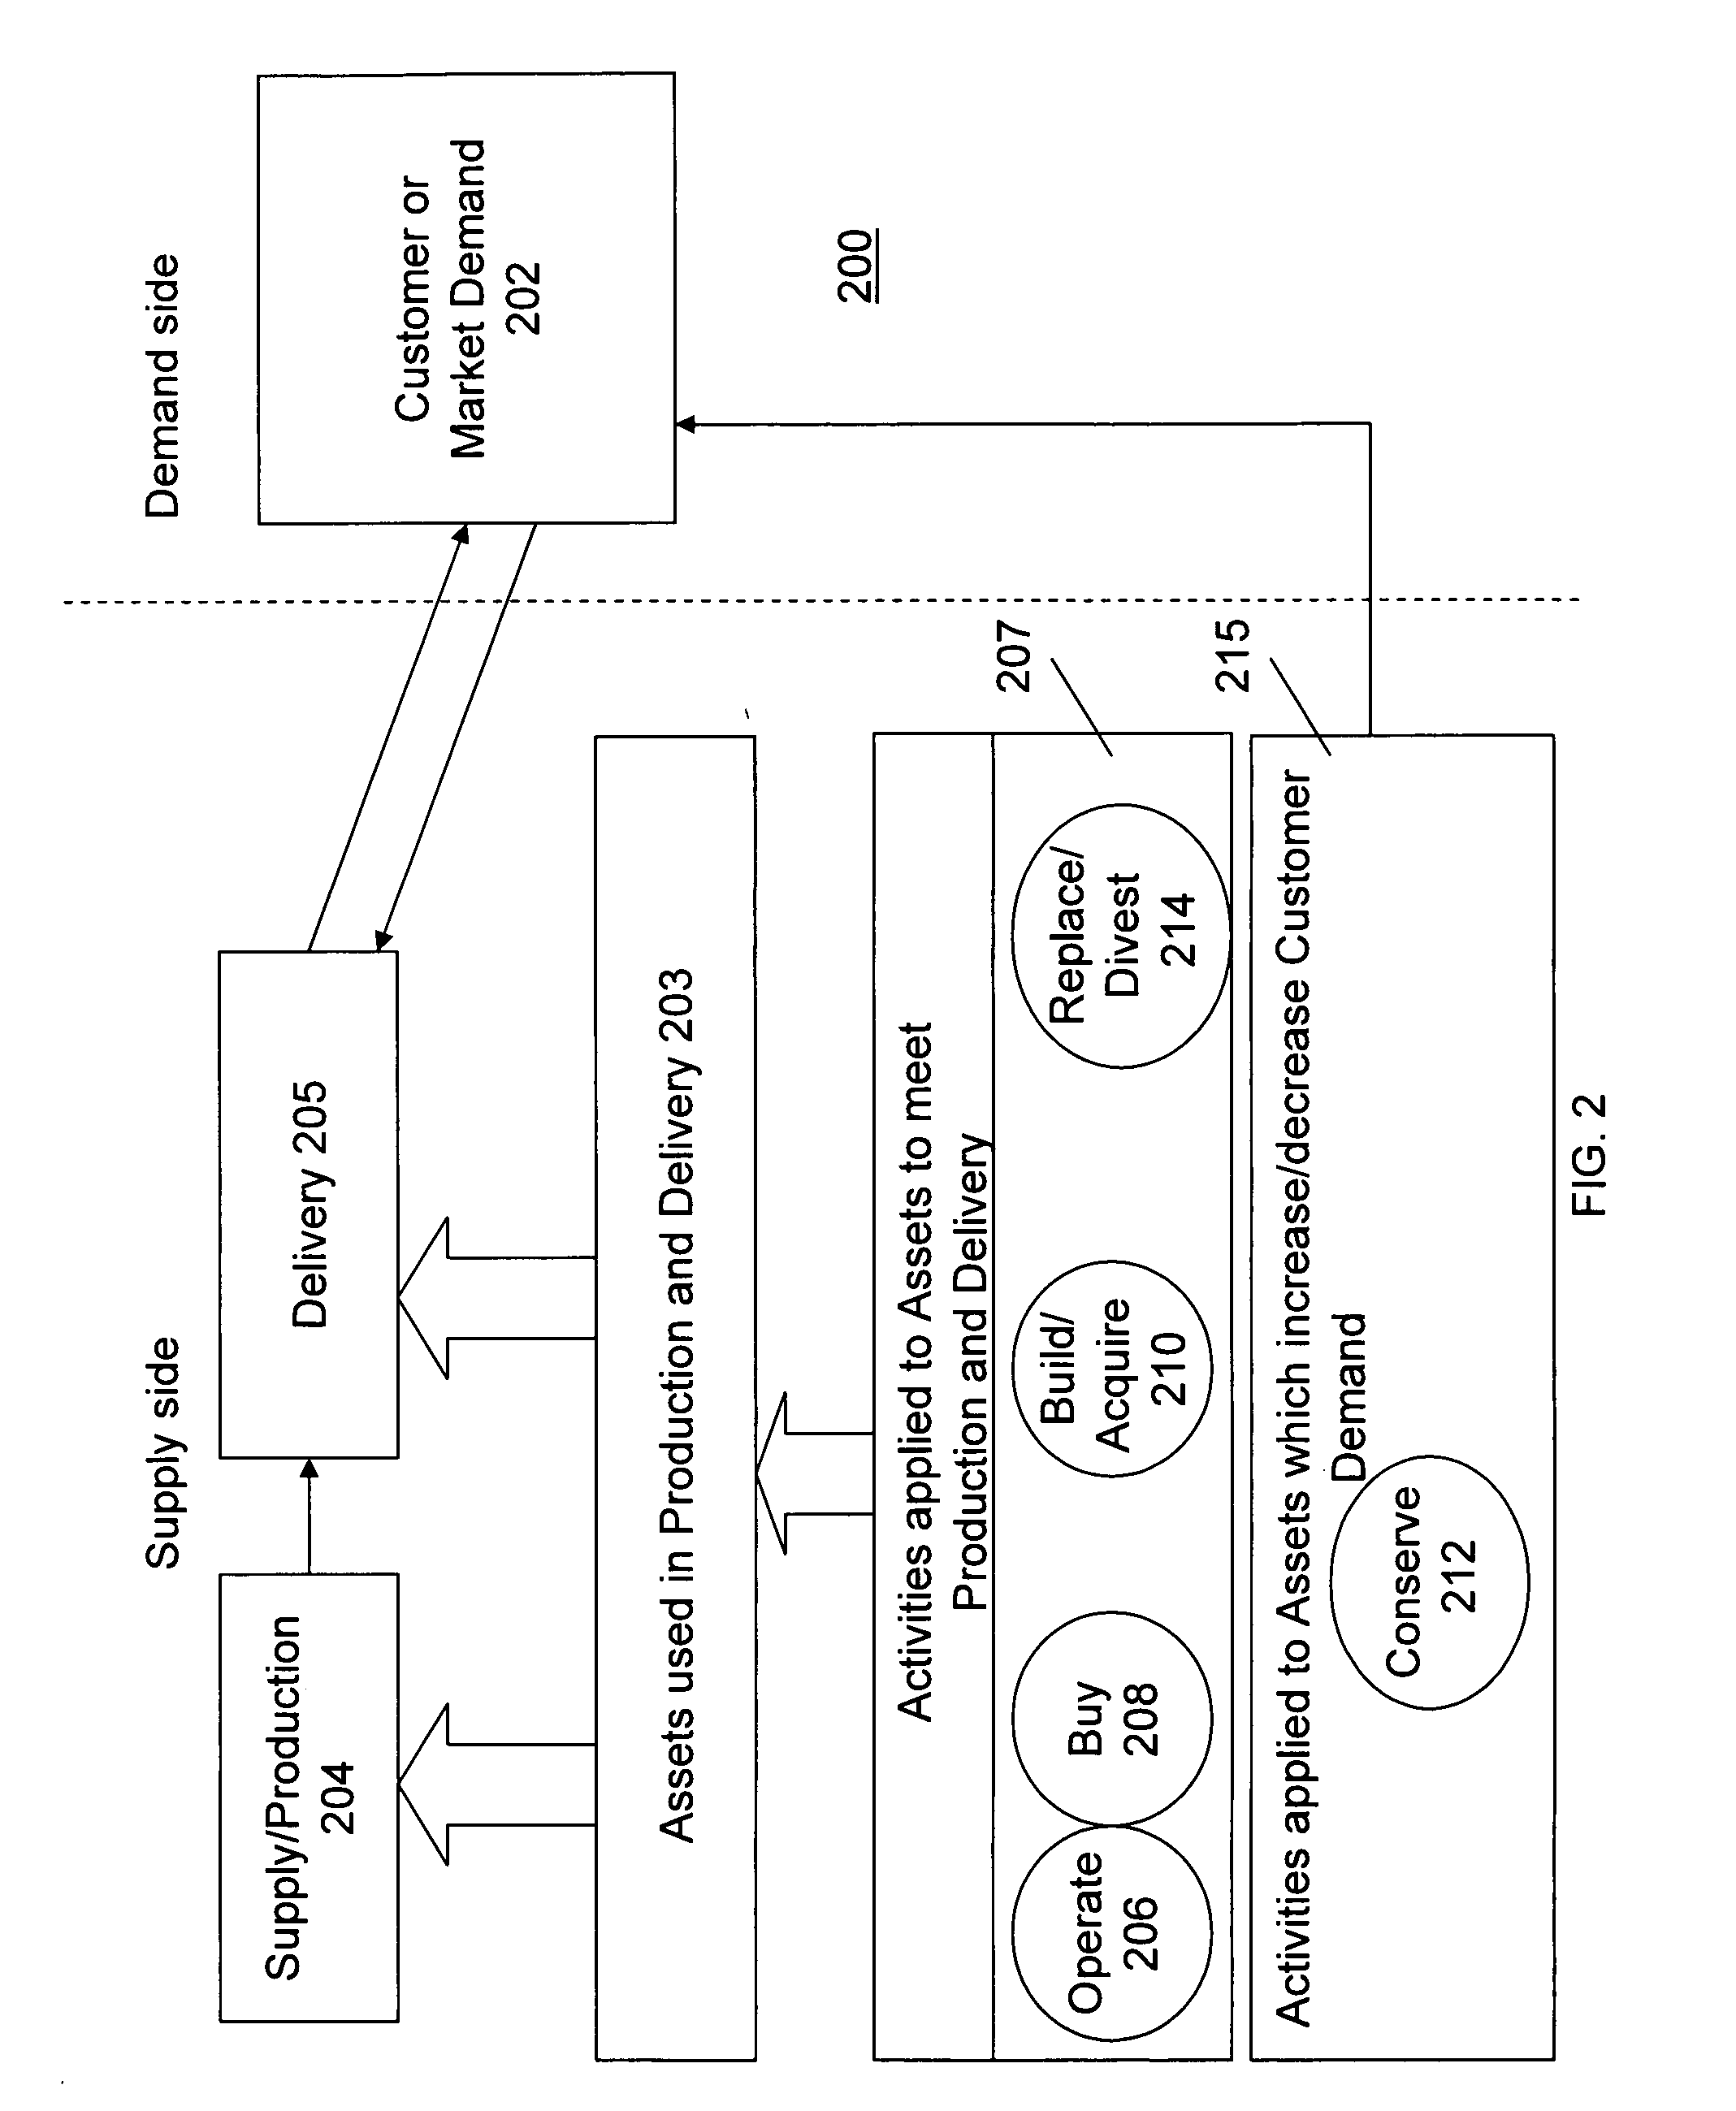 System and method for modeling an asset-based business